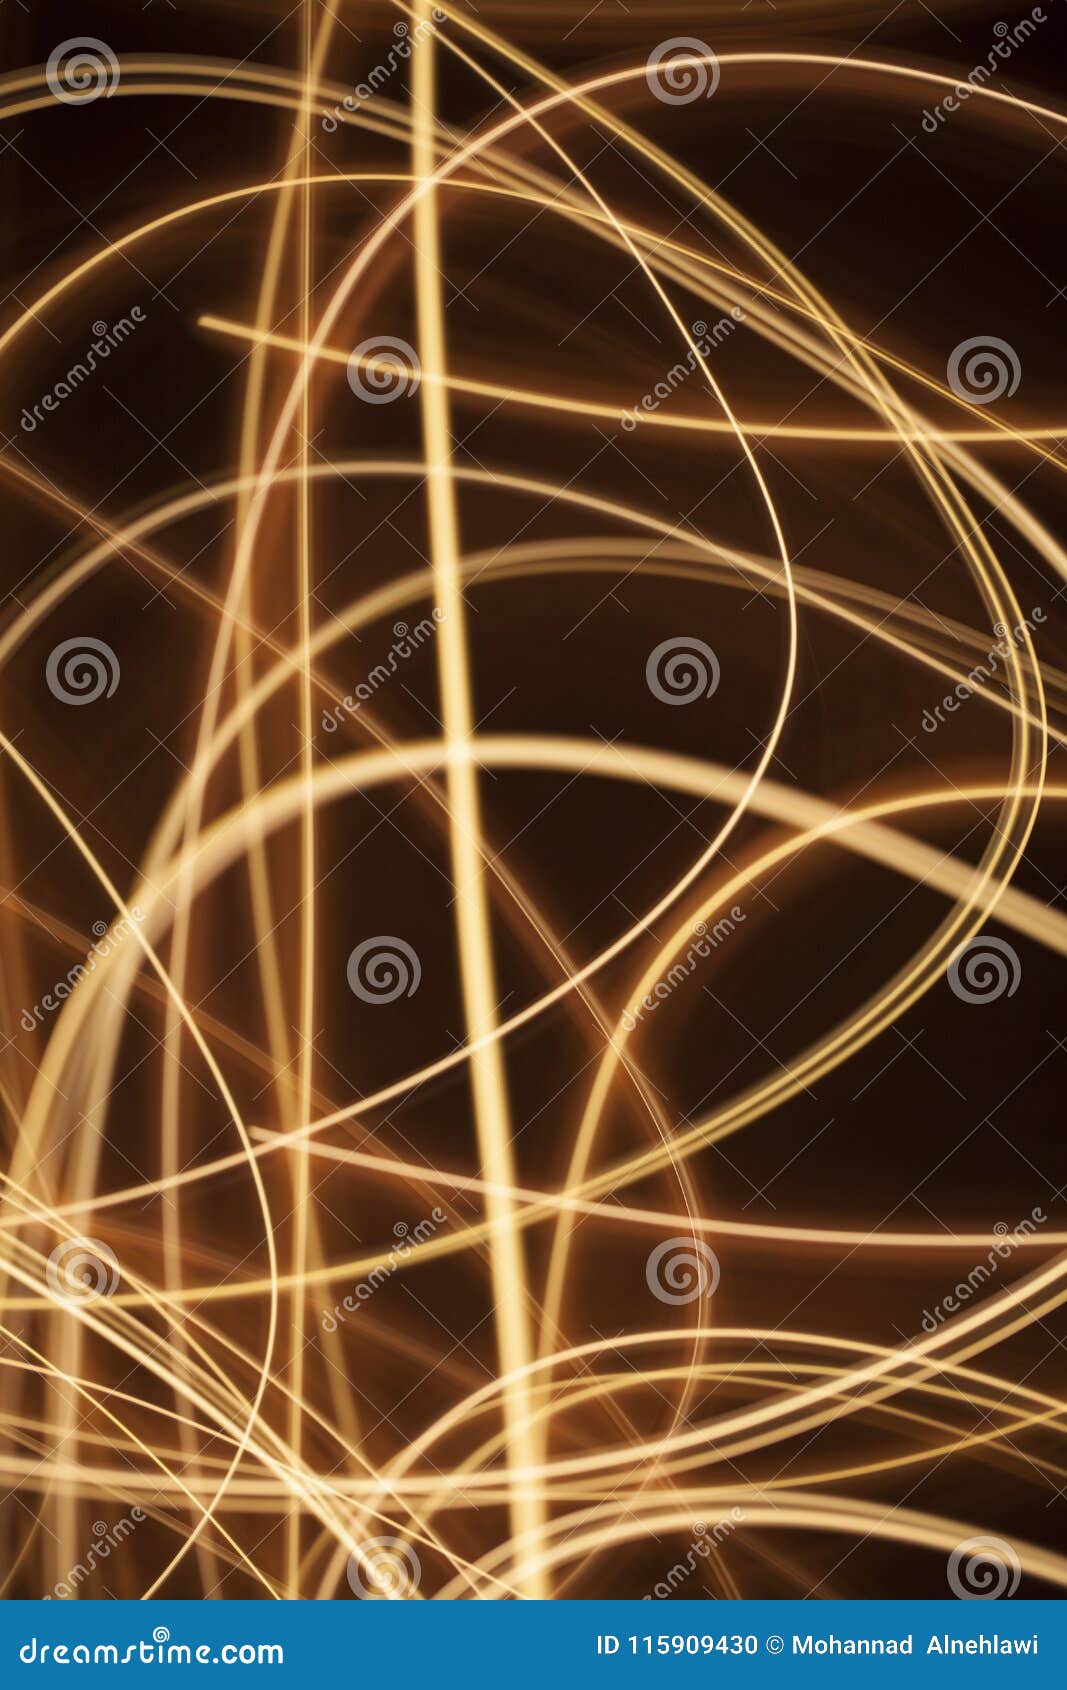 Swirl Sparkling Glowing Lines Background Stock Photo - Image of ...